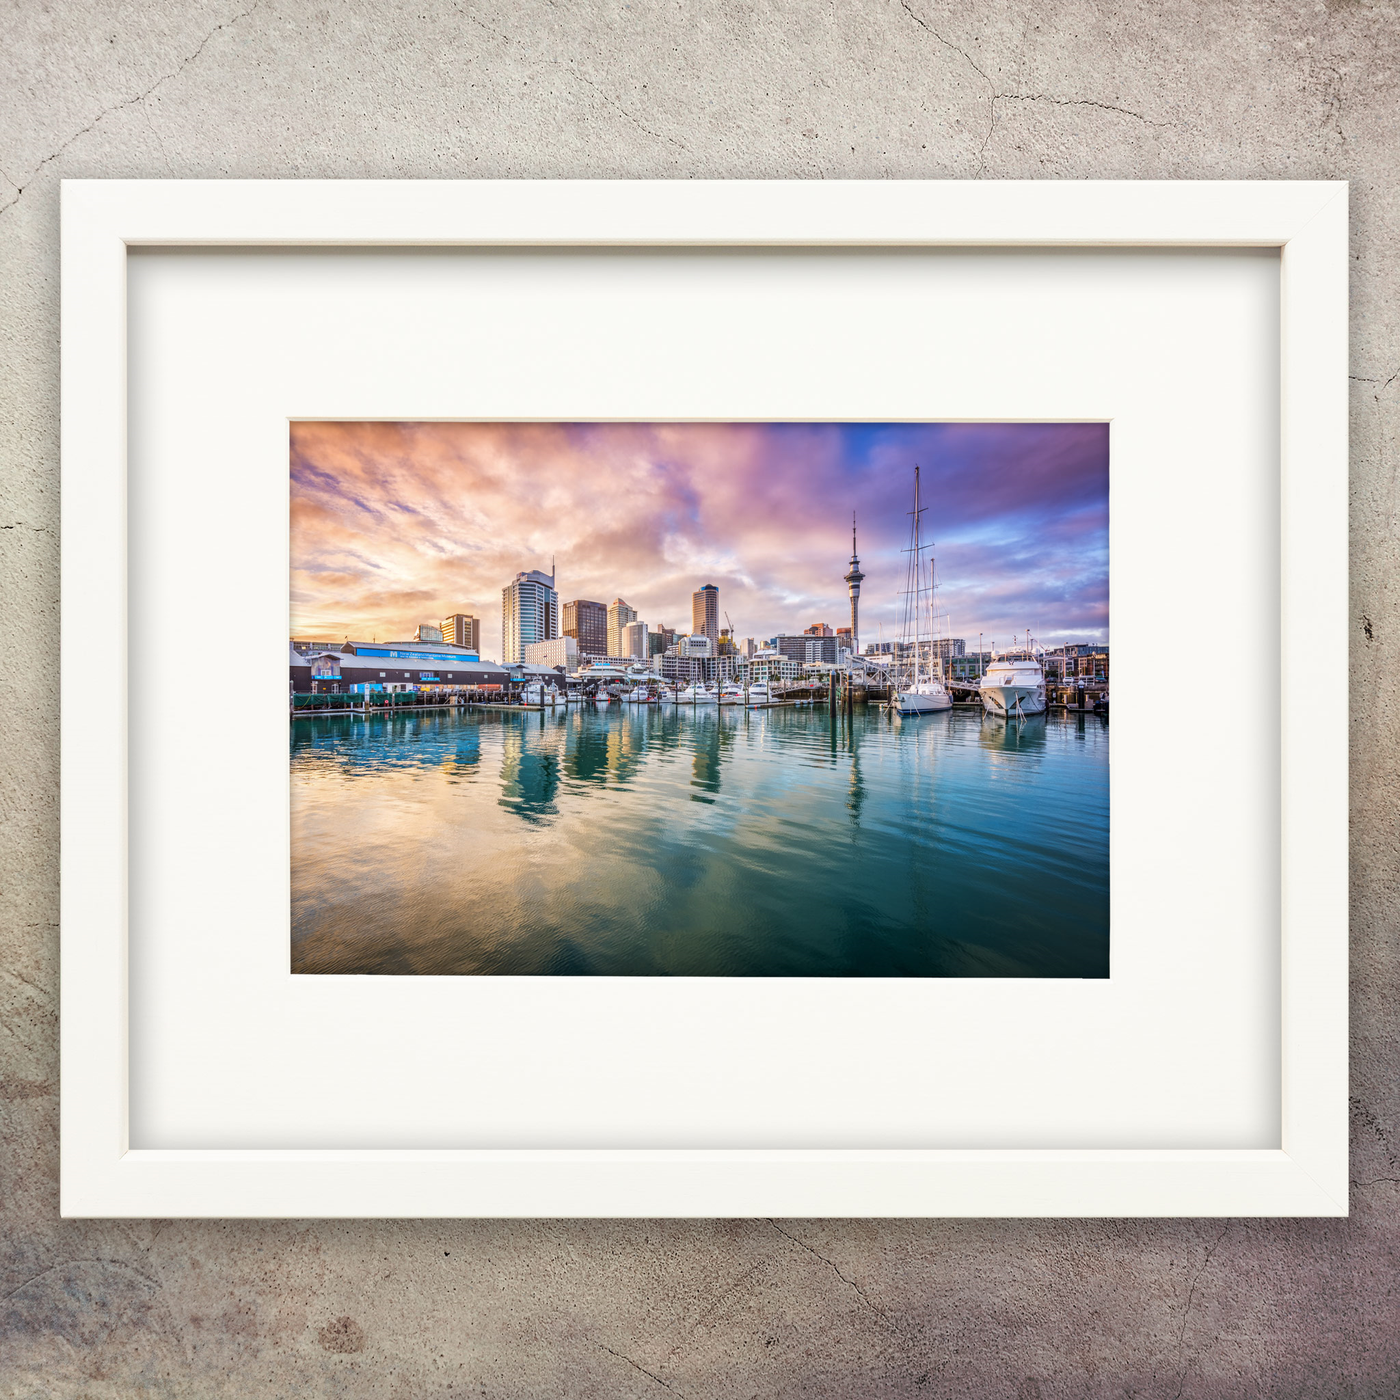 Pikitia A4 framed print - Sunrise at Viaduct Harbour